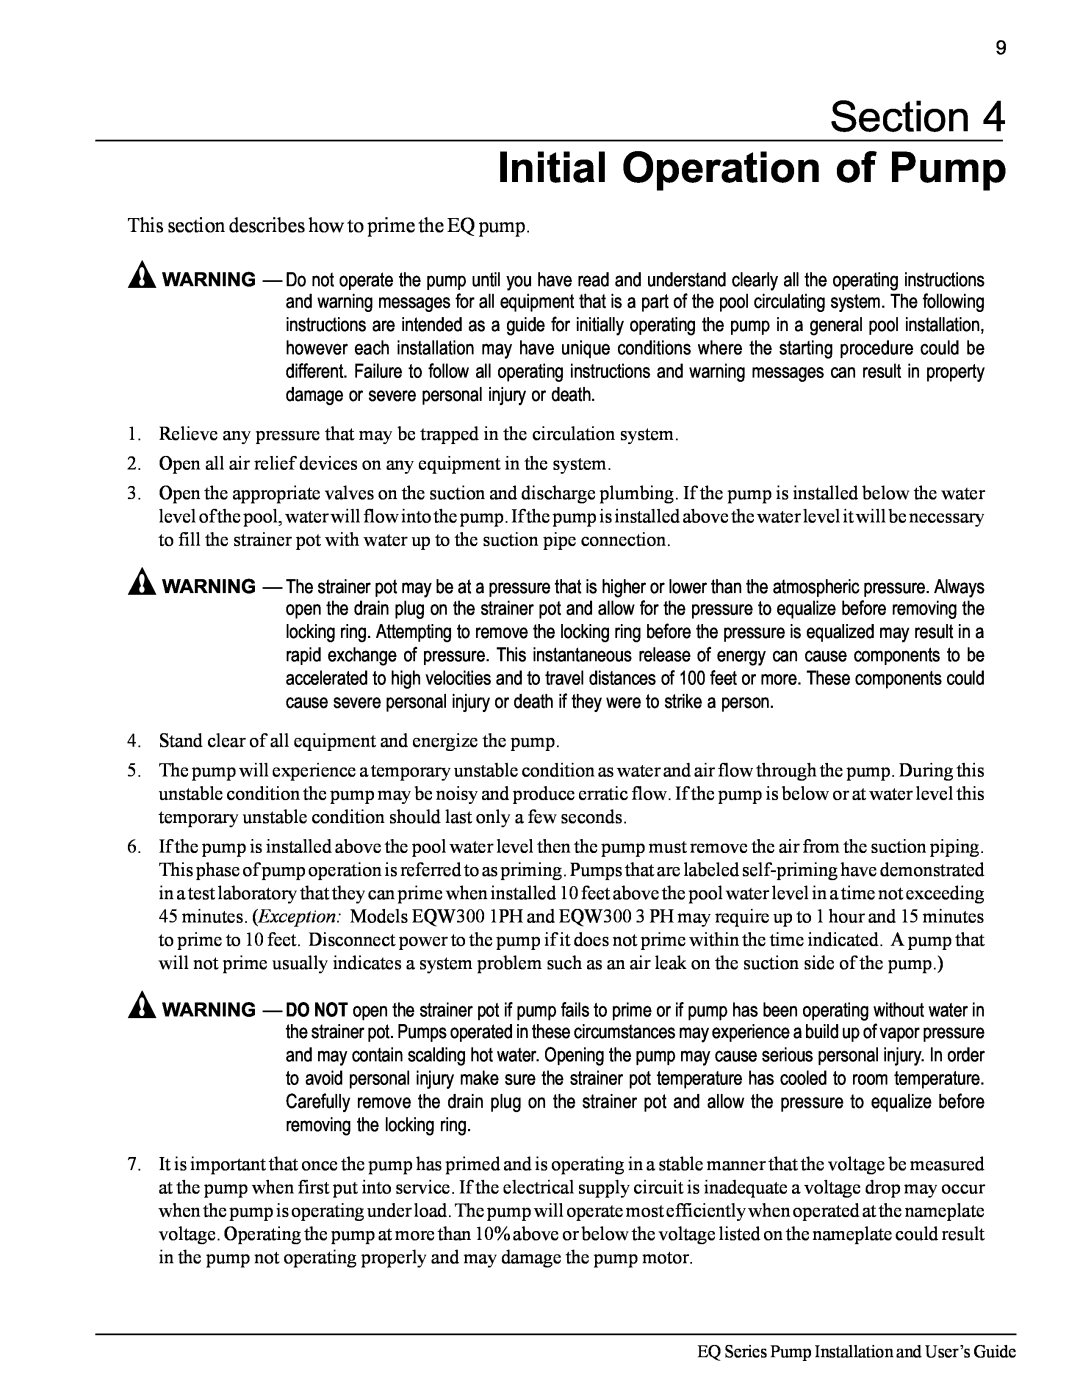 Pentair EQ SERIES Section Initial Operation of Pump, This section describes how to prime the EQ pump 